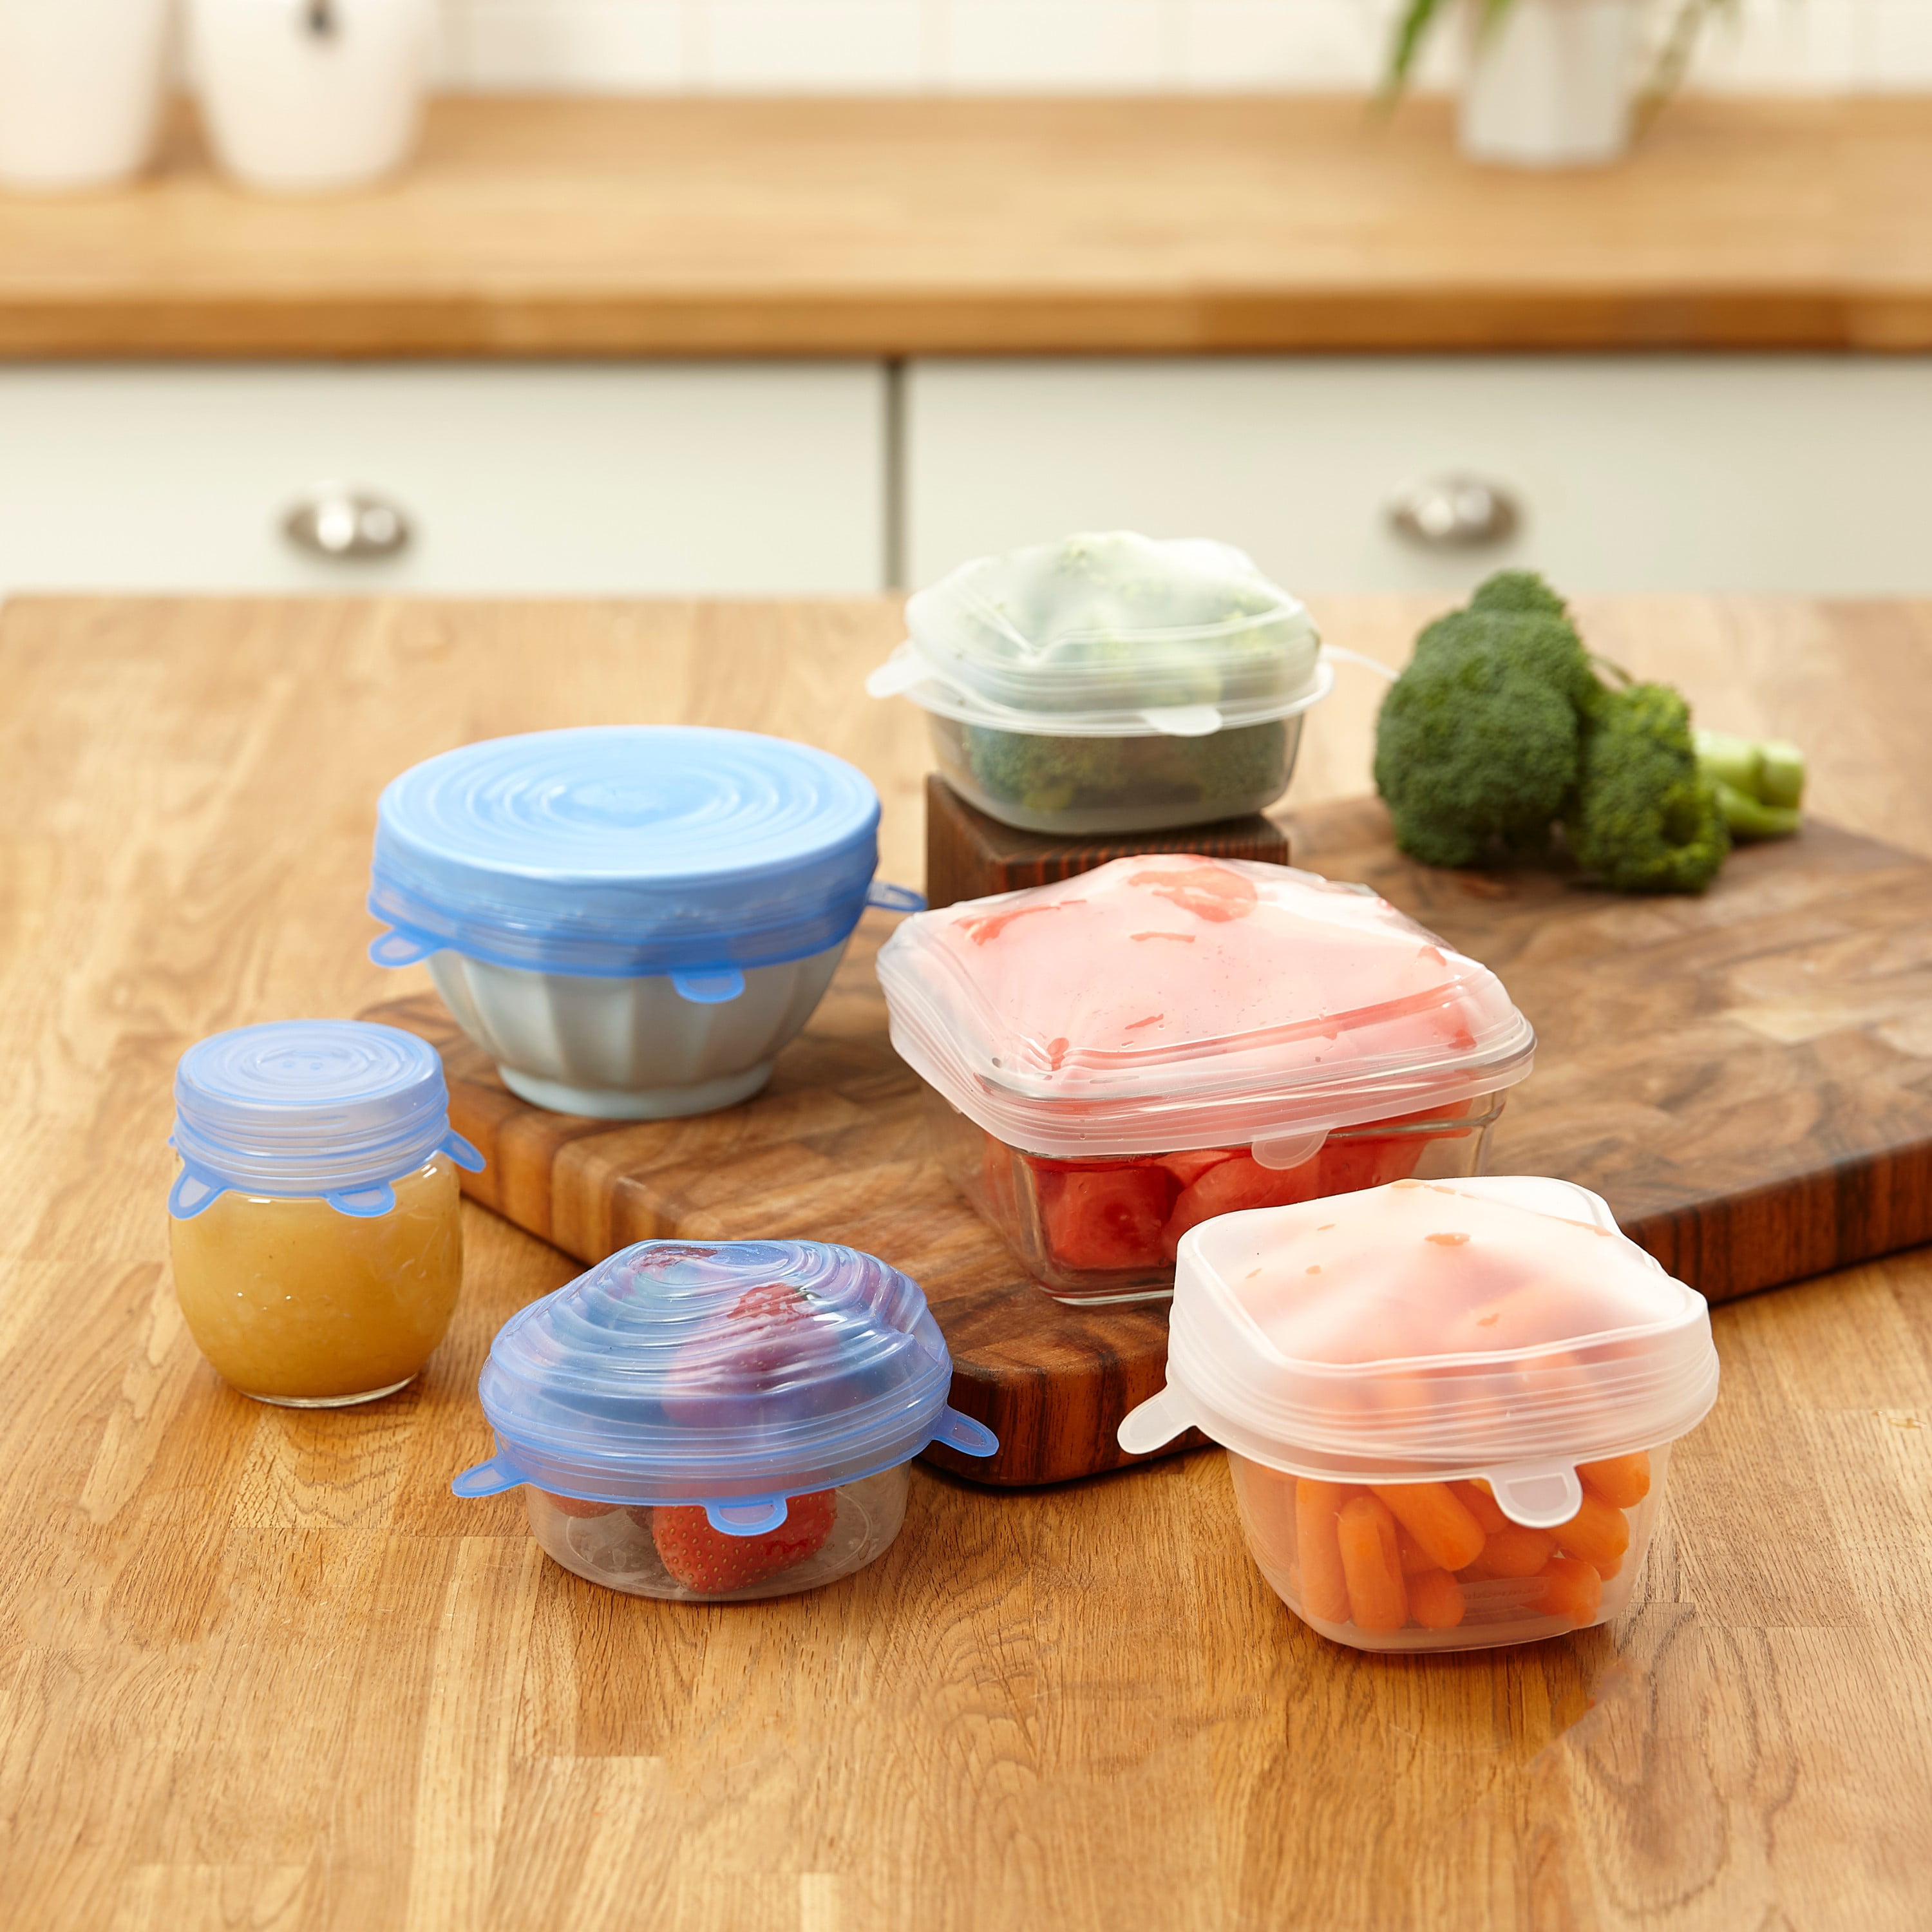 Food Safe Reusable Silicone Stretch and Seal Lids, 7-pc set Food